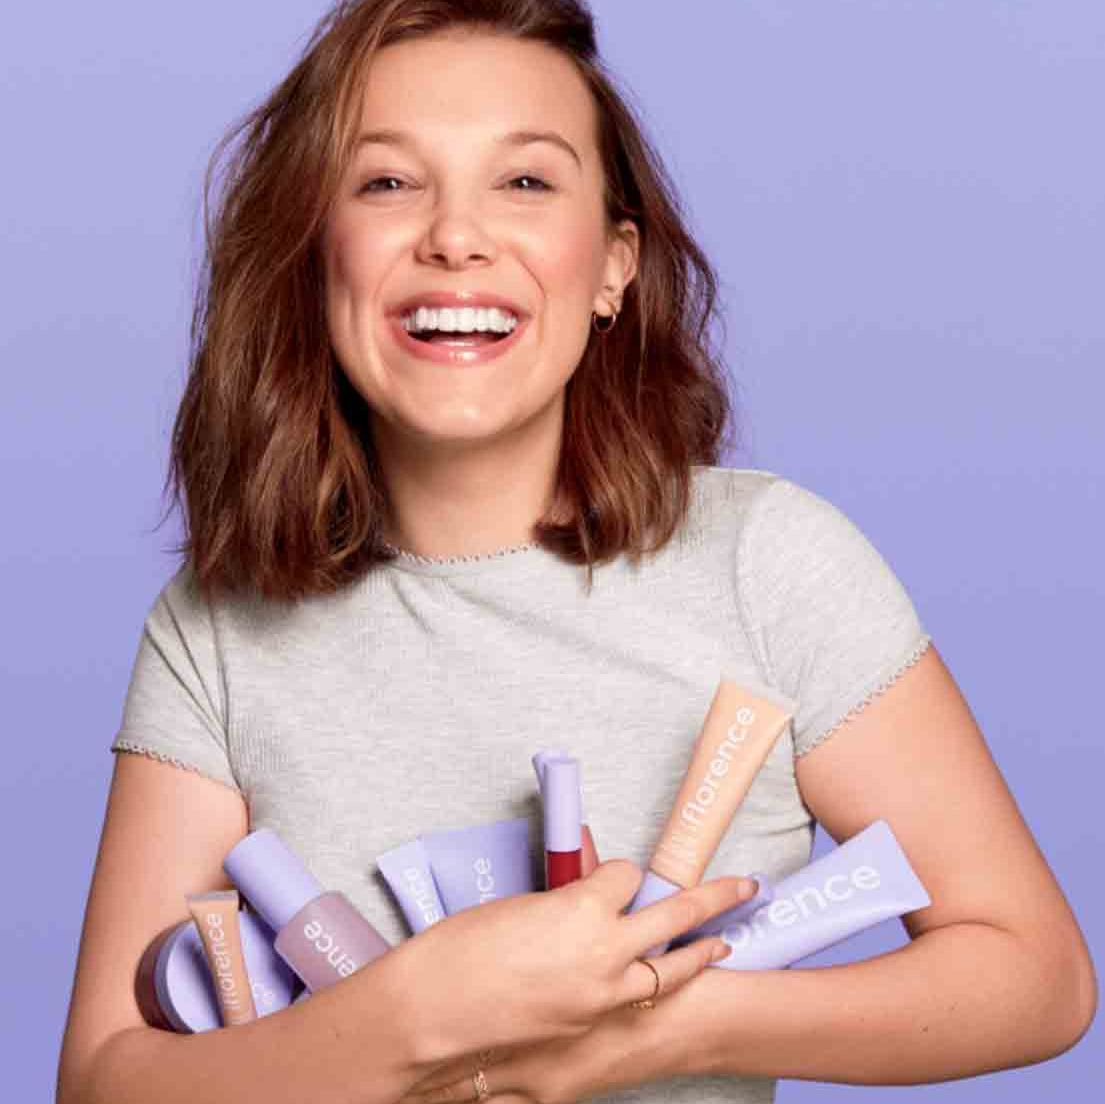 Millie Bobby Brown Is Launching Beauty Brand